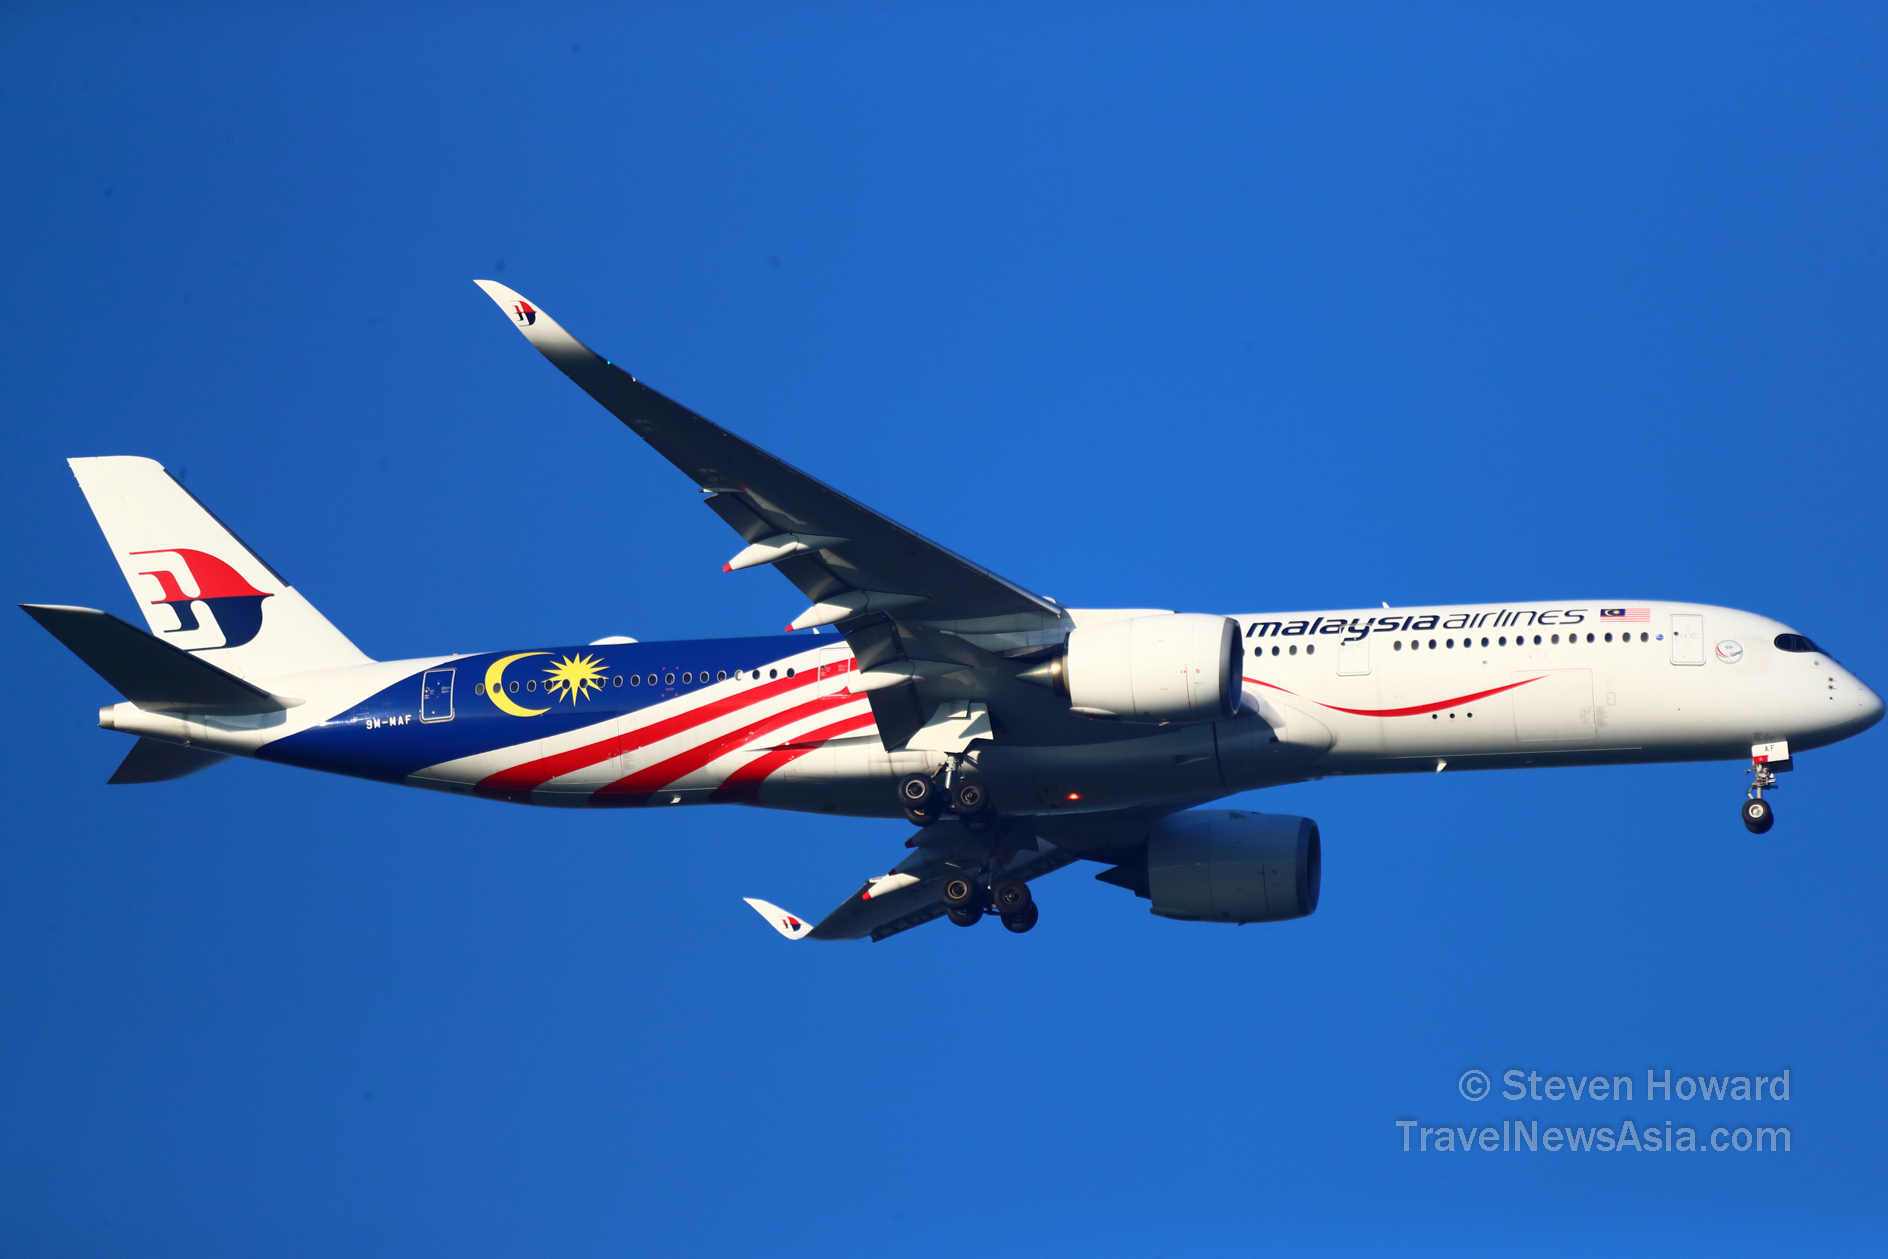 Malaysia Airlines A350-900 reg: 9M-MAF. Picture by Steven Howard of TravelNewsAsia.com Click to enlarge.